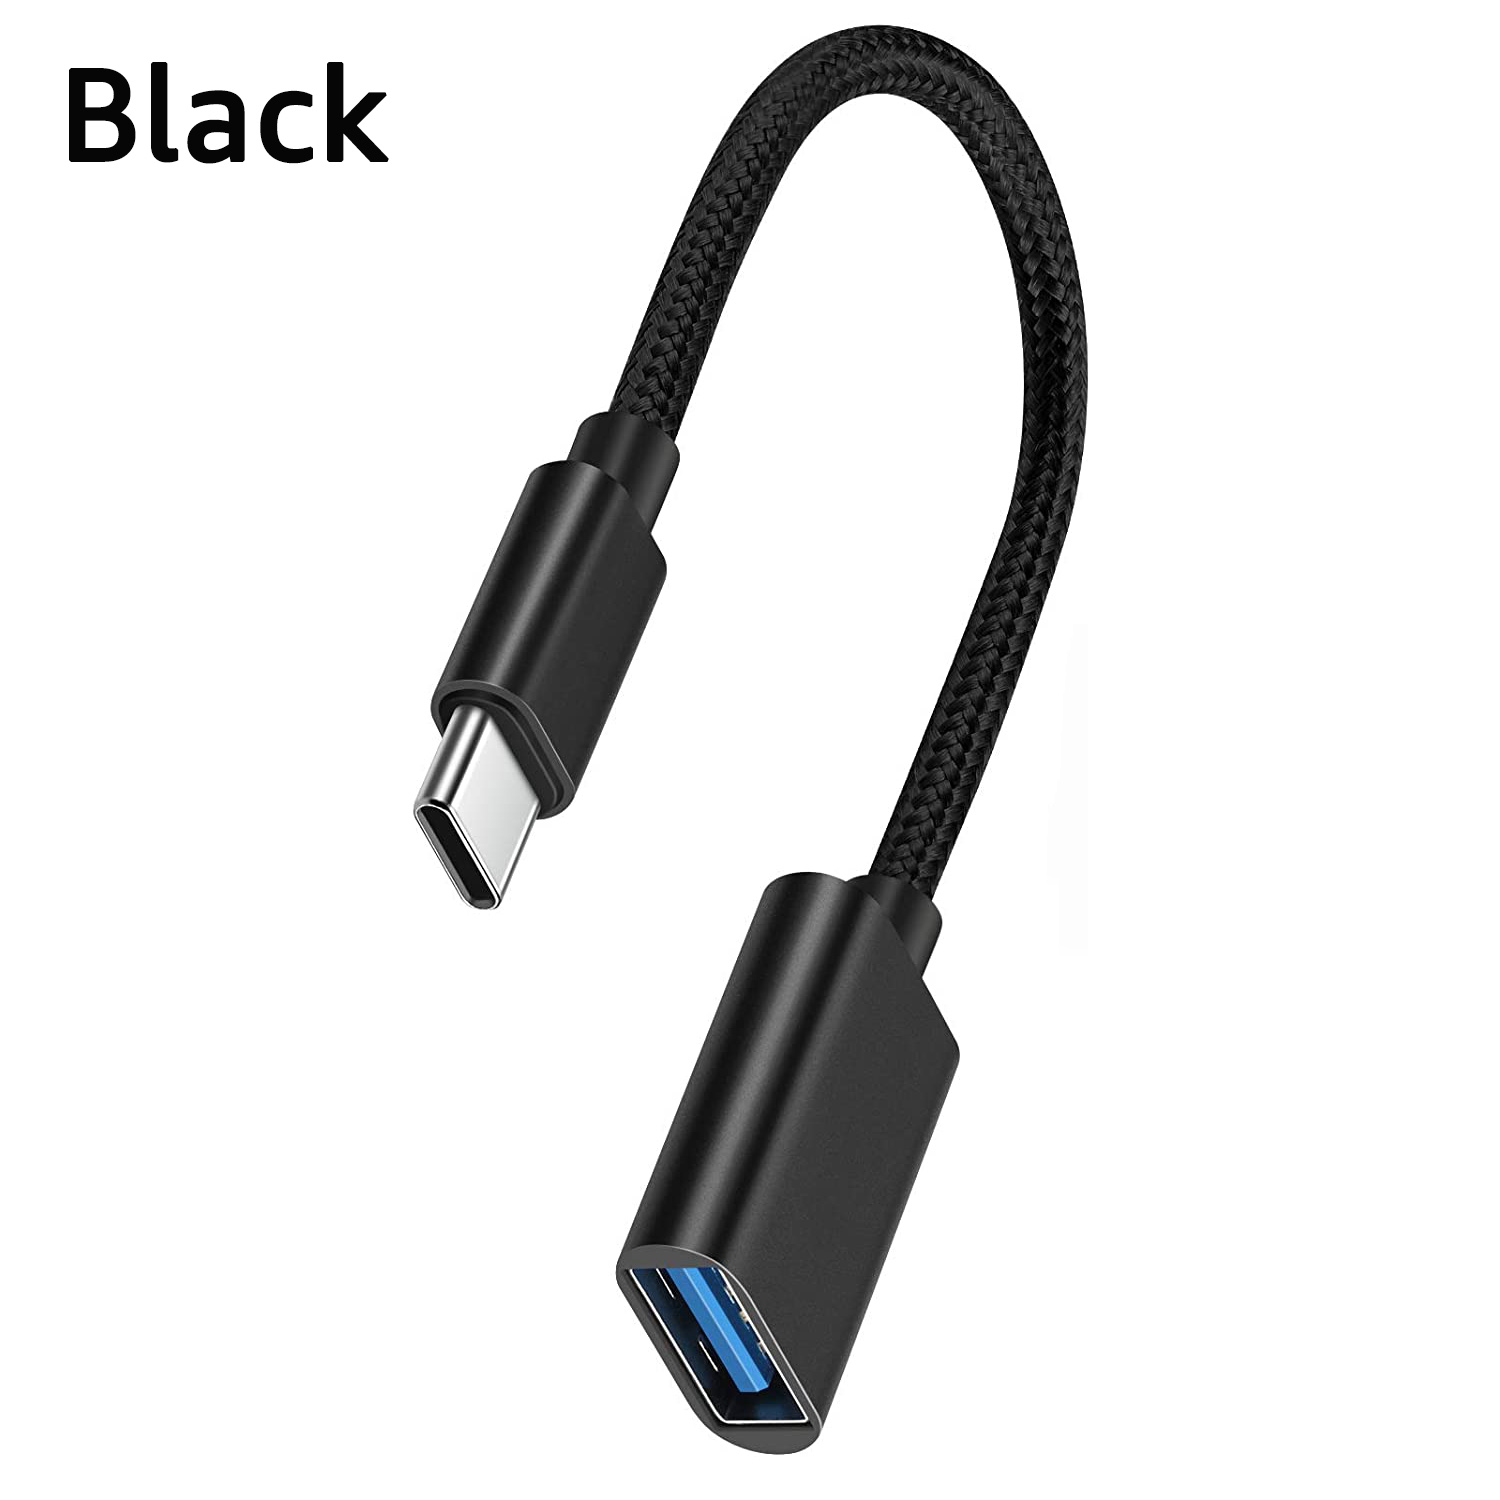 otg type c cable adapter usb type c adapter connector xiaomi